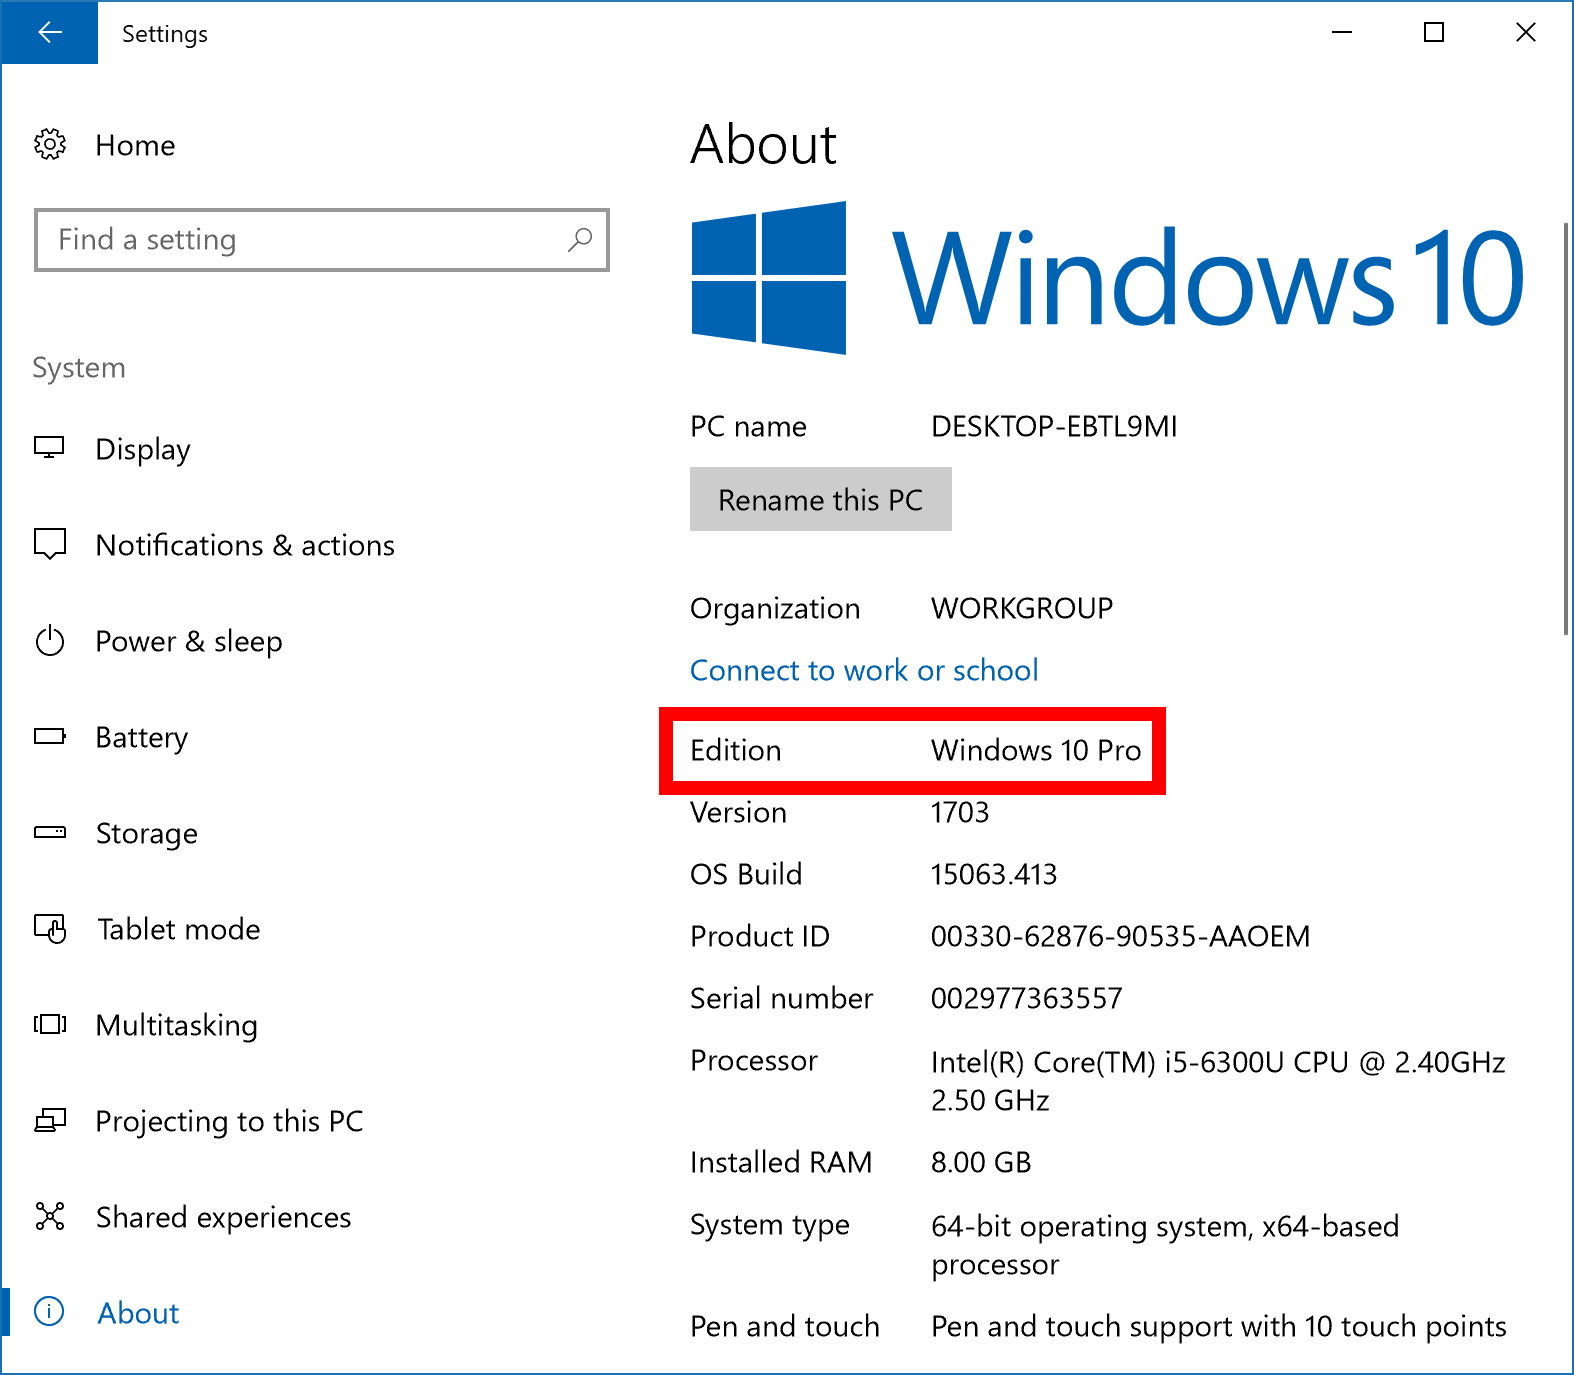 i had windows 10 pro but cant find product key